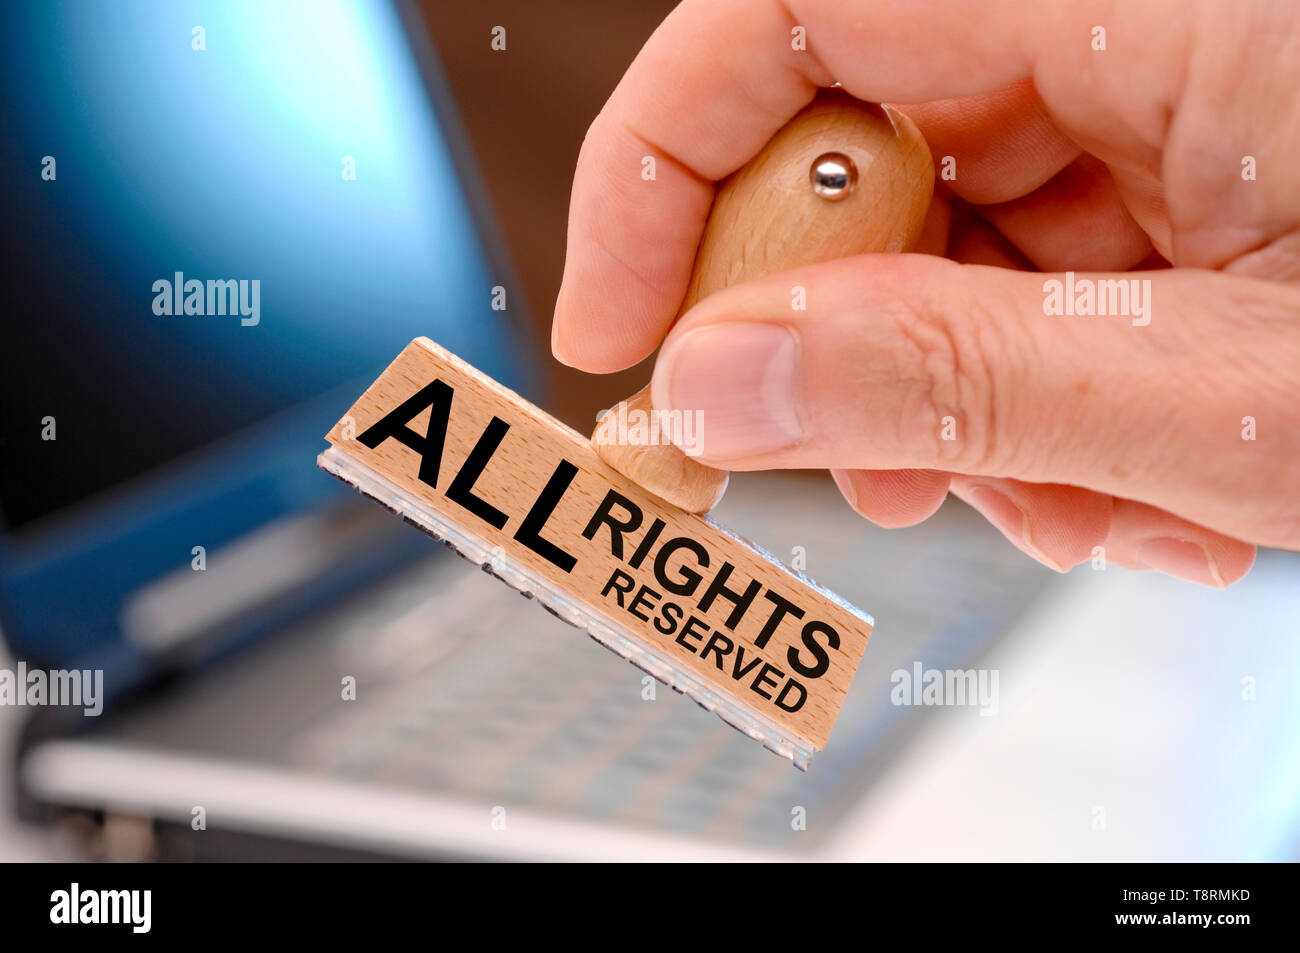 all rights reserved printed on rubber stamp Stock Photo